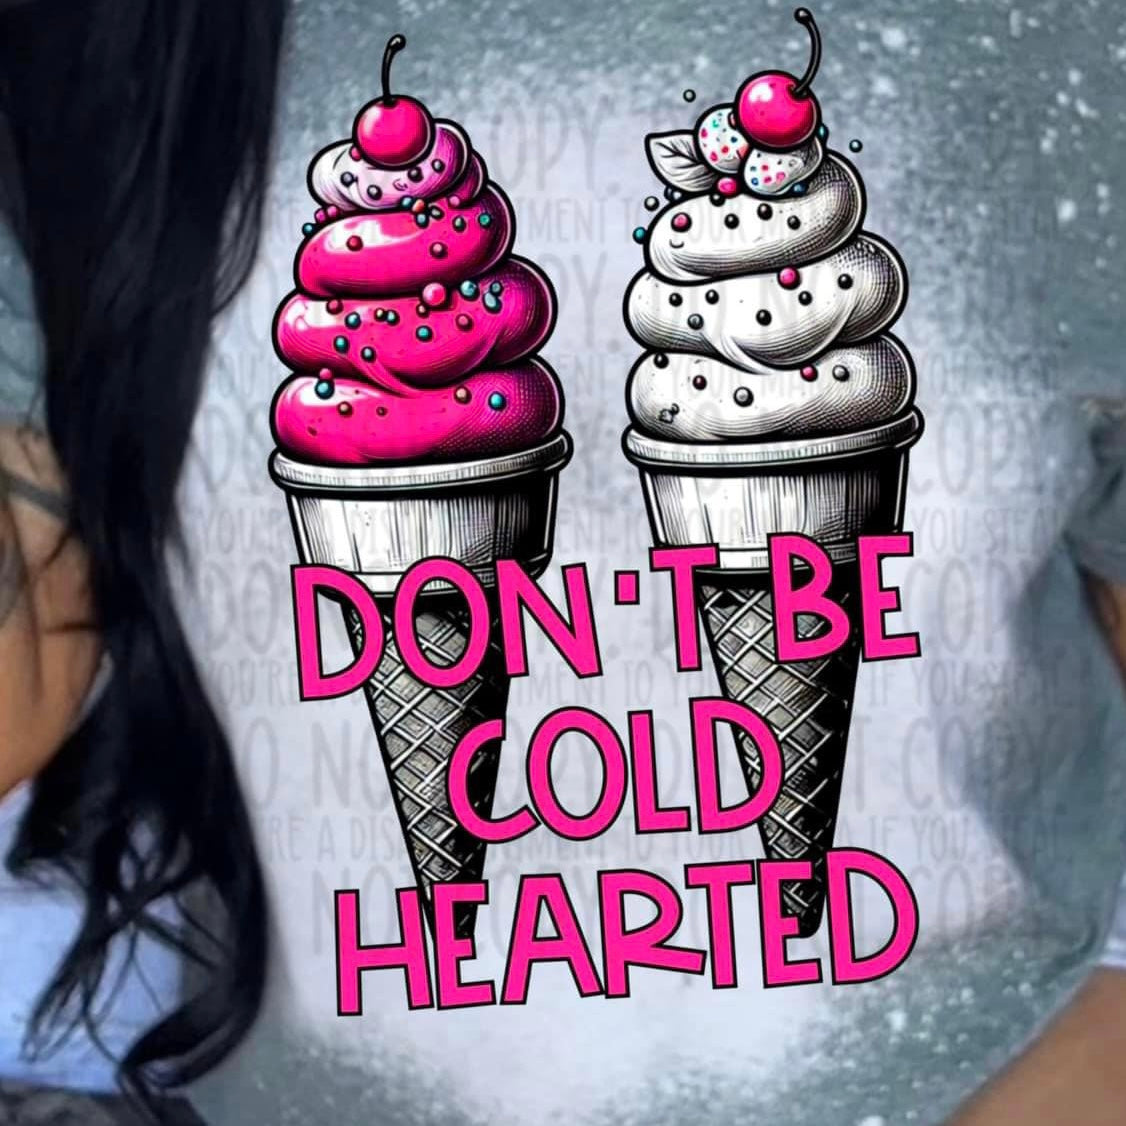 Don’t be cold hearted